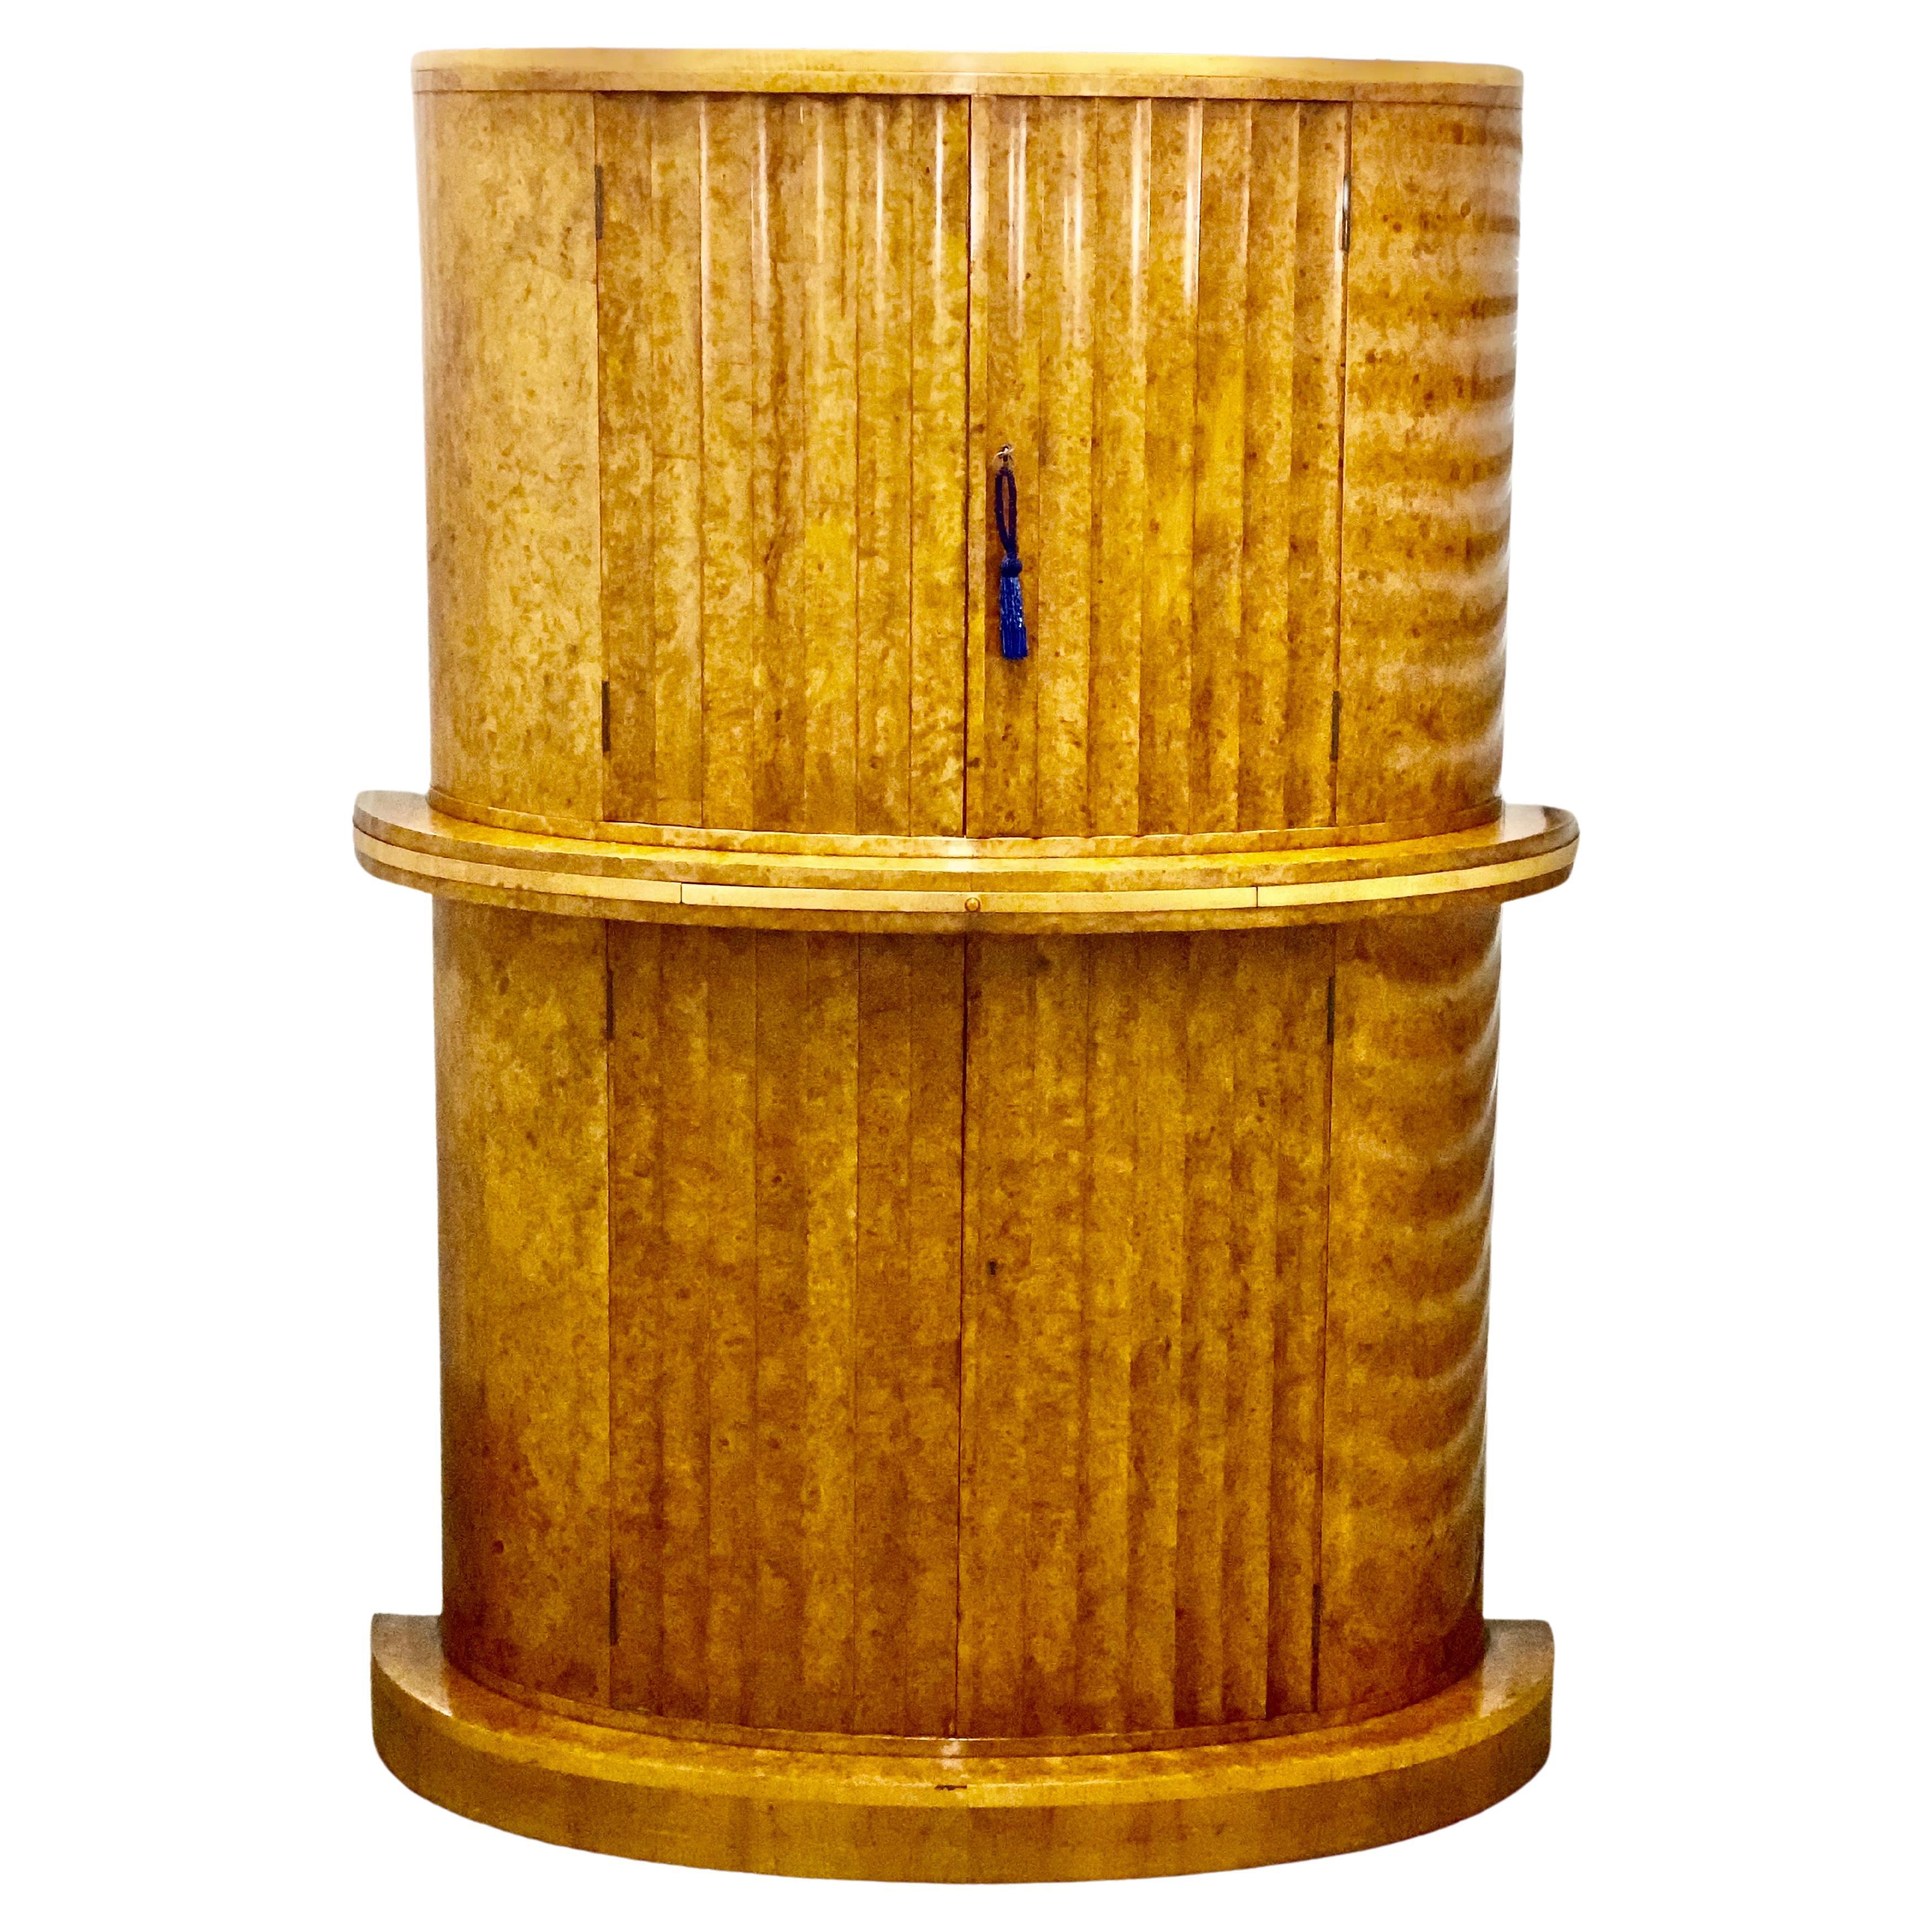  Art Deco Blonde Burl Maple Semi Circular Cocktail Cabinet Bar by H&L Epstein  For Sale 5